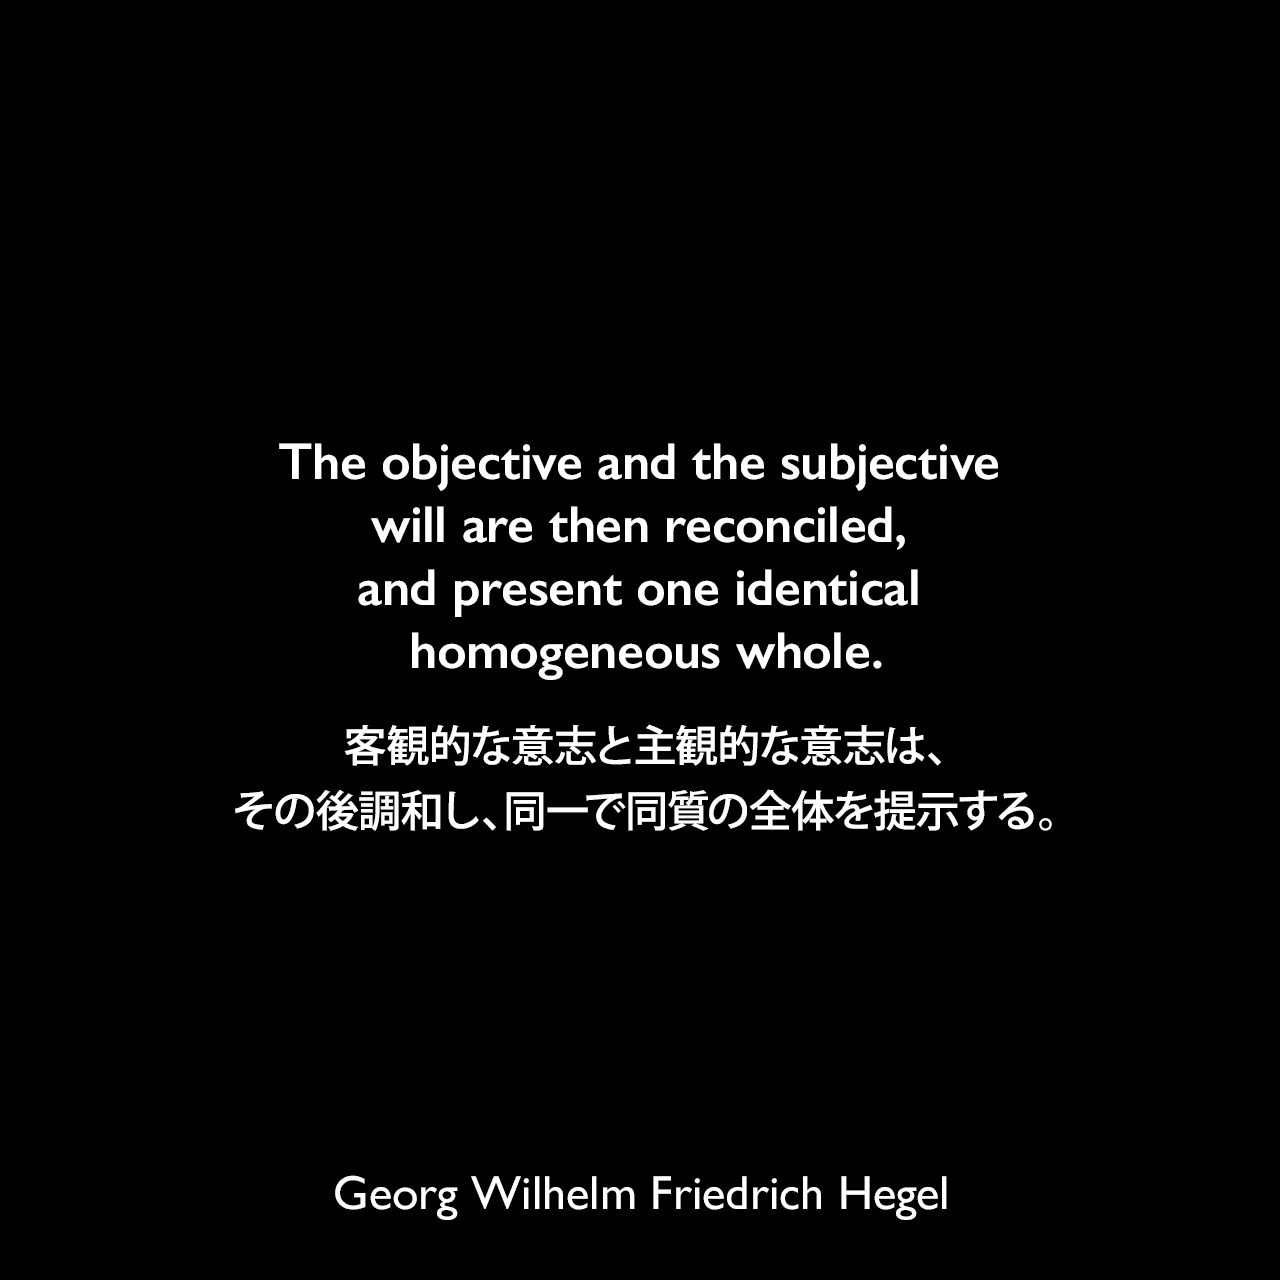 The objective and the subjective will are then reconciled, and present one identical homogeneous whole.客観的な意志と主観的な意志は、その後調和し、同一で同質の全体を提示する。- ヘーゲルによる本「Lectures on the Philosophy of History」よりGeorg Wilhelm Friedrich Hegel